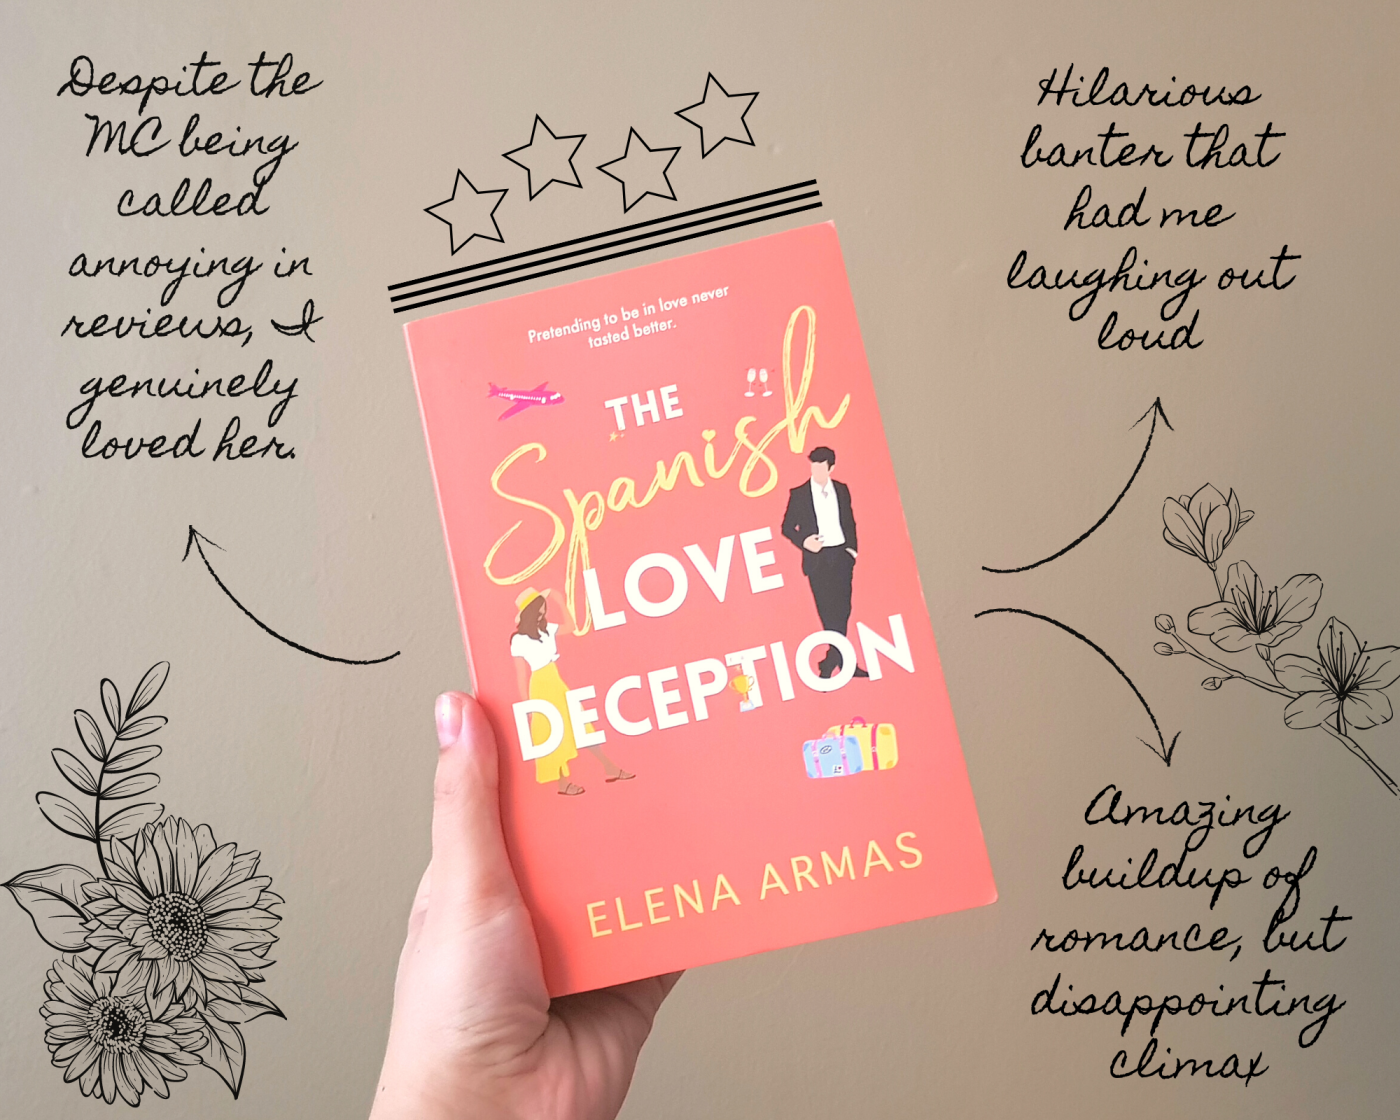 The Spanish Love Deception by Elena Armas – Right Writing Words